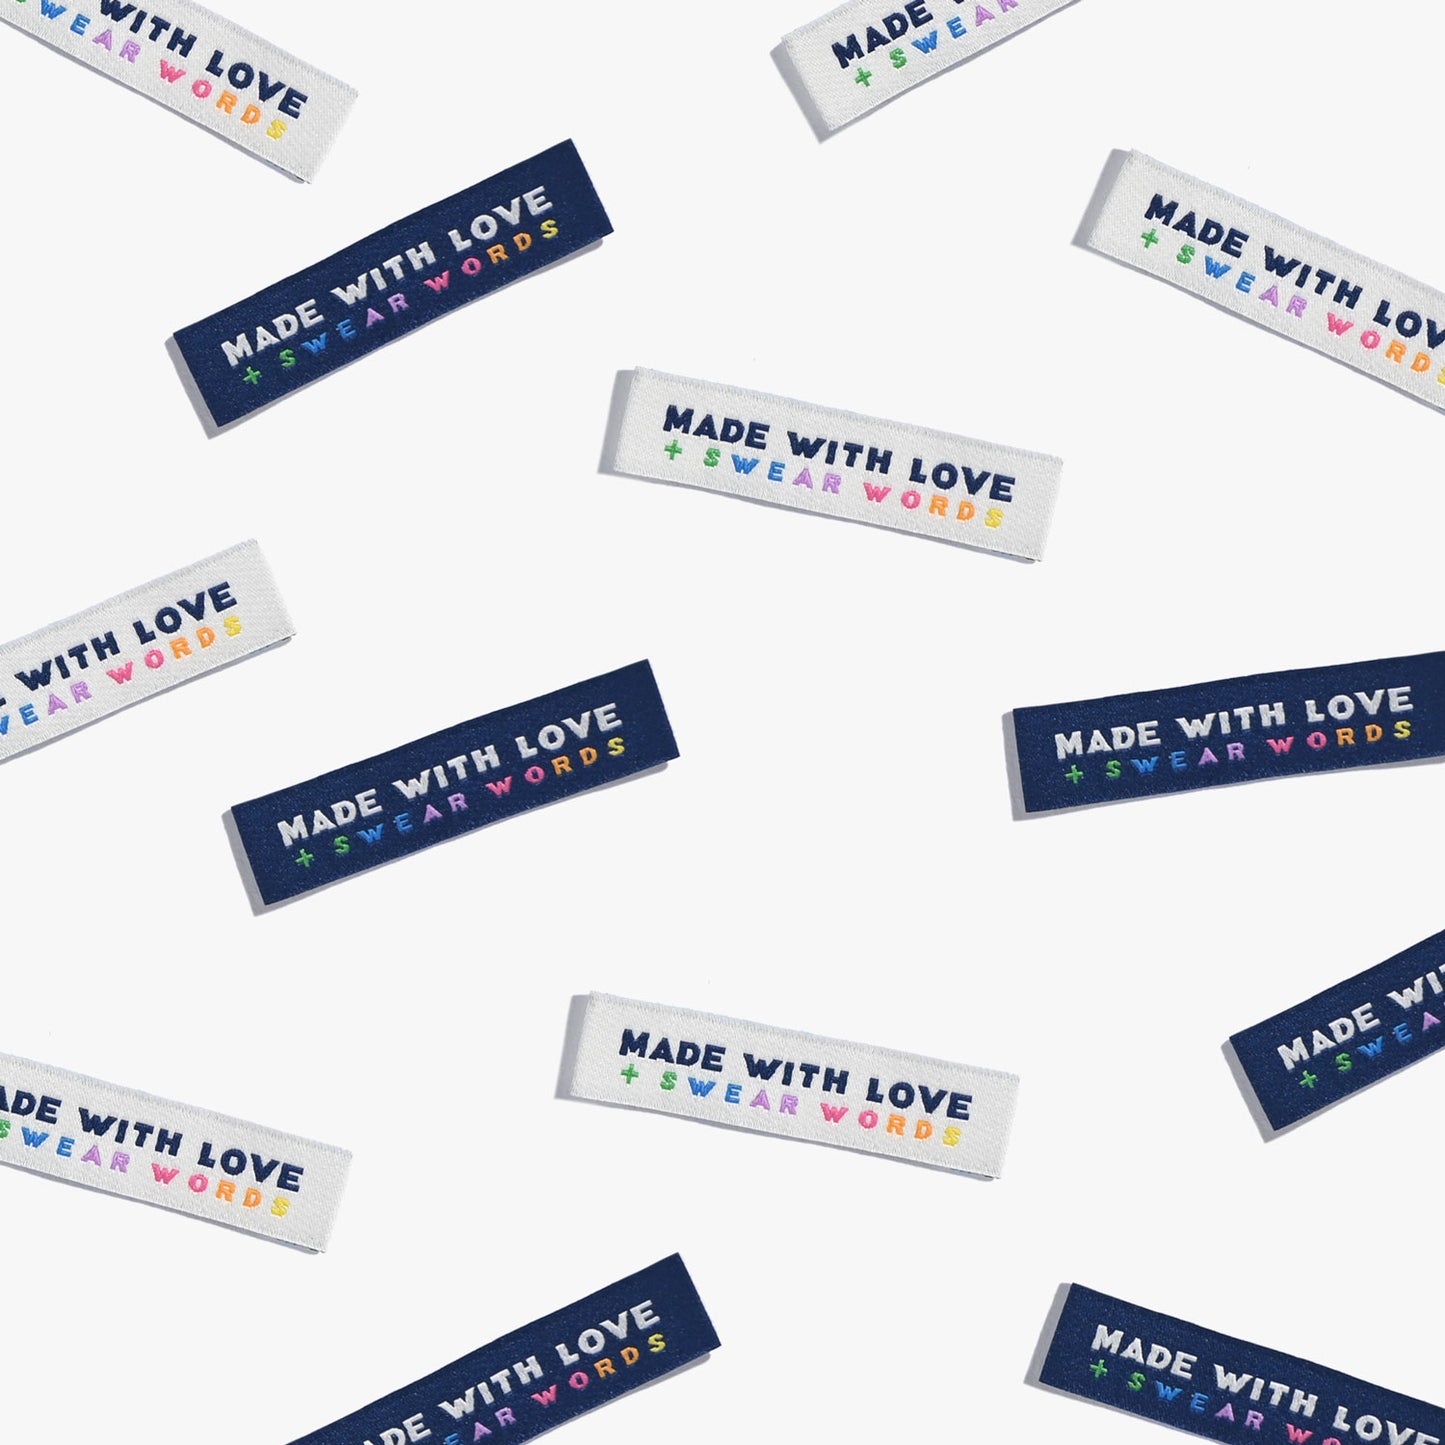 Kylie and the Machine - Woven labels - "Made With Love and Swear Words"